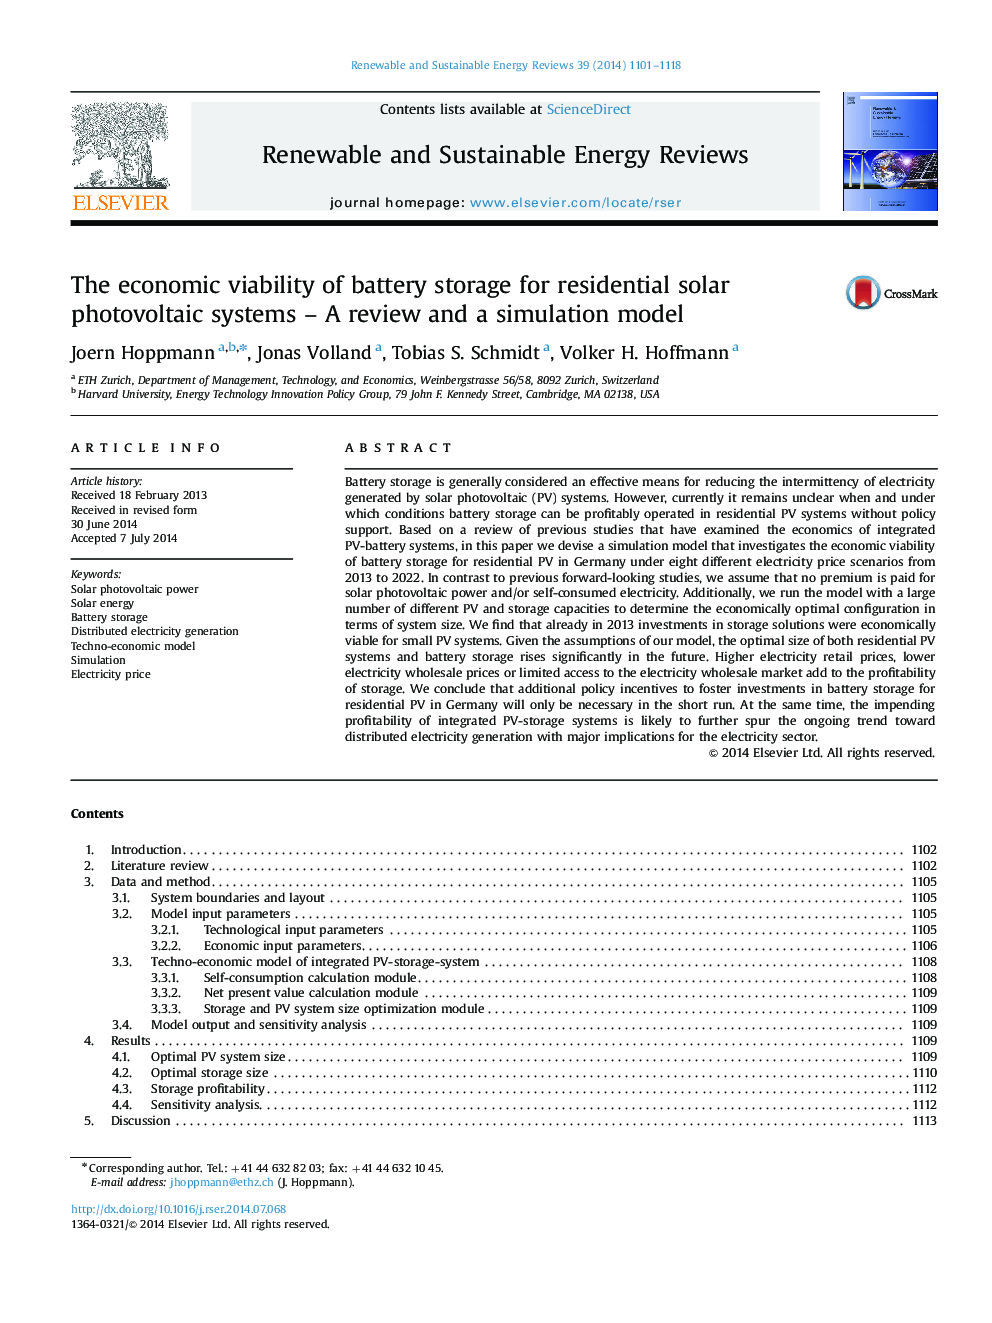 The economic viability of battery storage for residential solar photovoltaic systems - A review and a simulation model